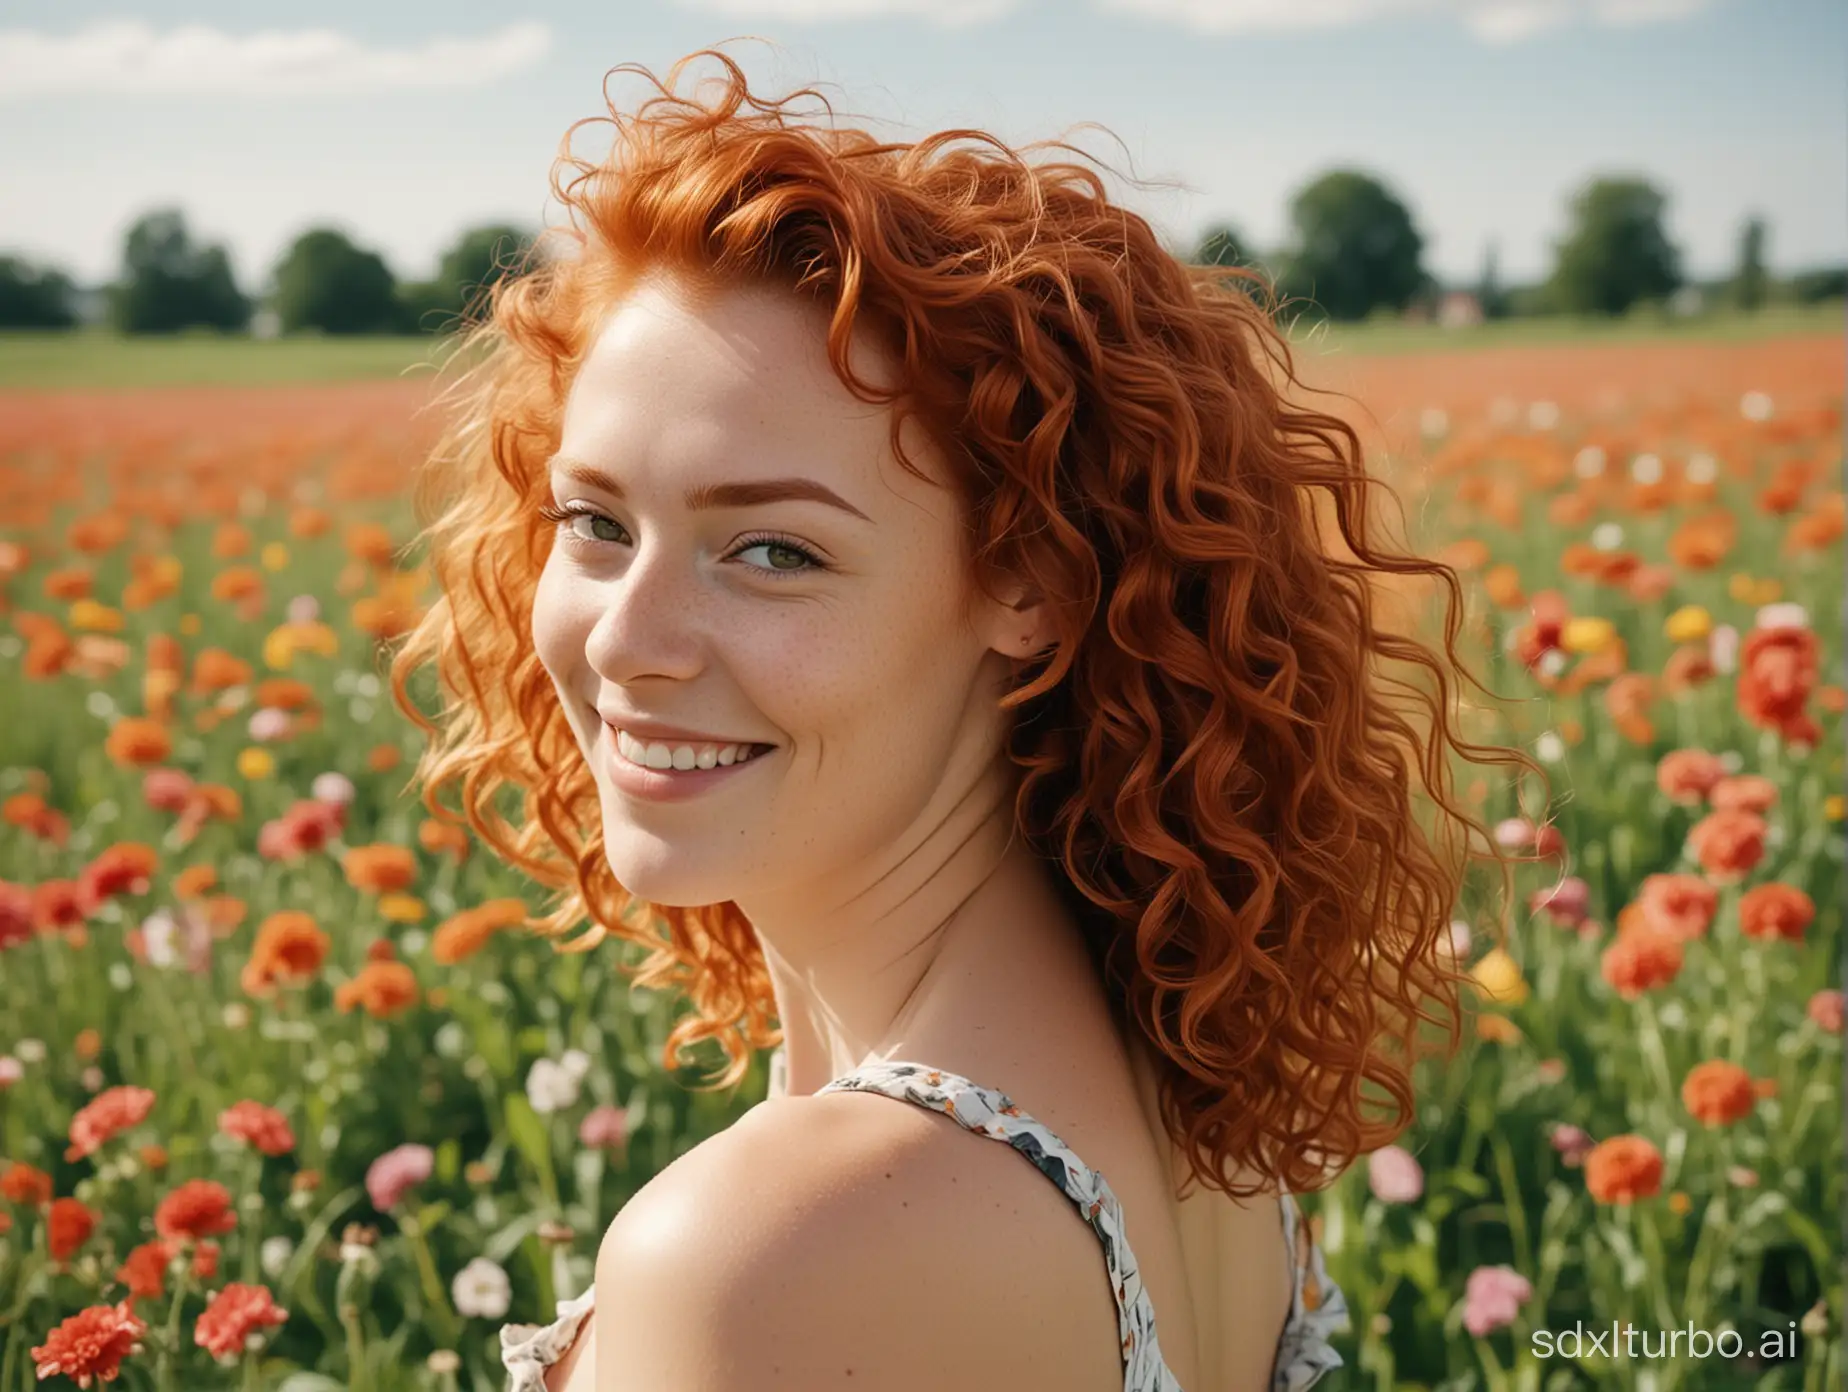 dutch angle shot, candid shots, portrait photography, a woman with red hair smiling, in the style of youthful energy, with curly hair on a summer afternoon, flower field, emotive faces, realistic skin, natural features, panasonic lumix s pro, kodak portra